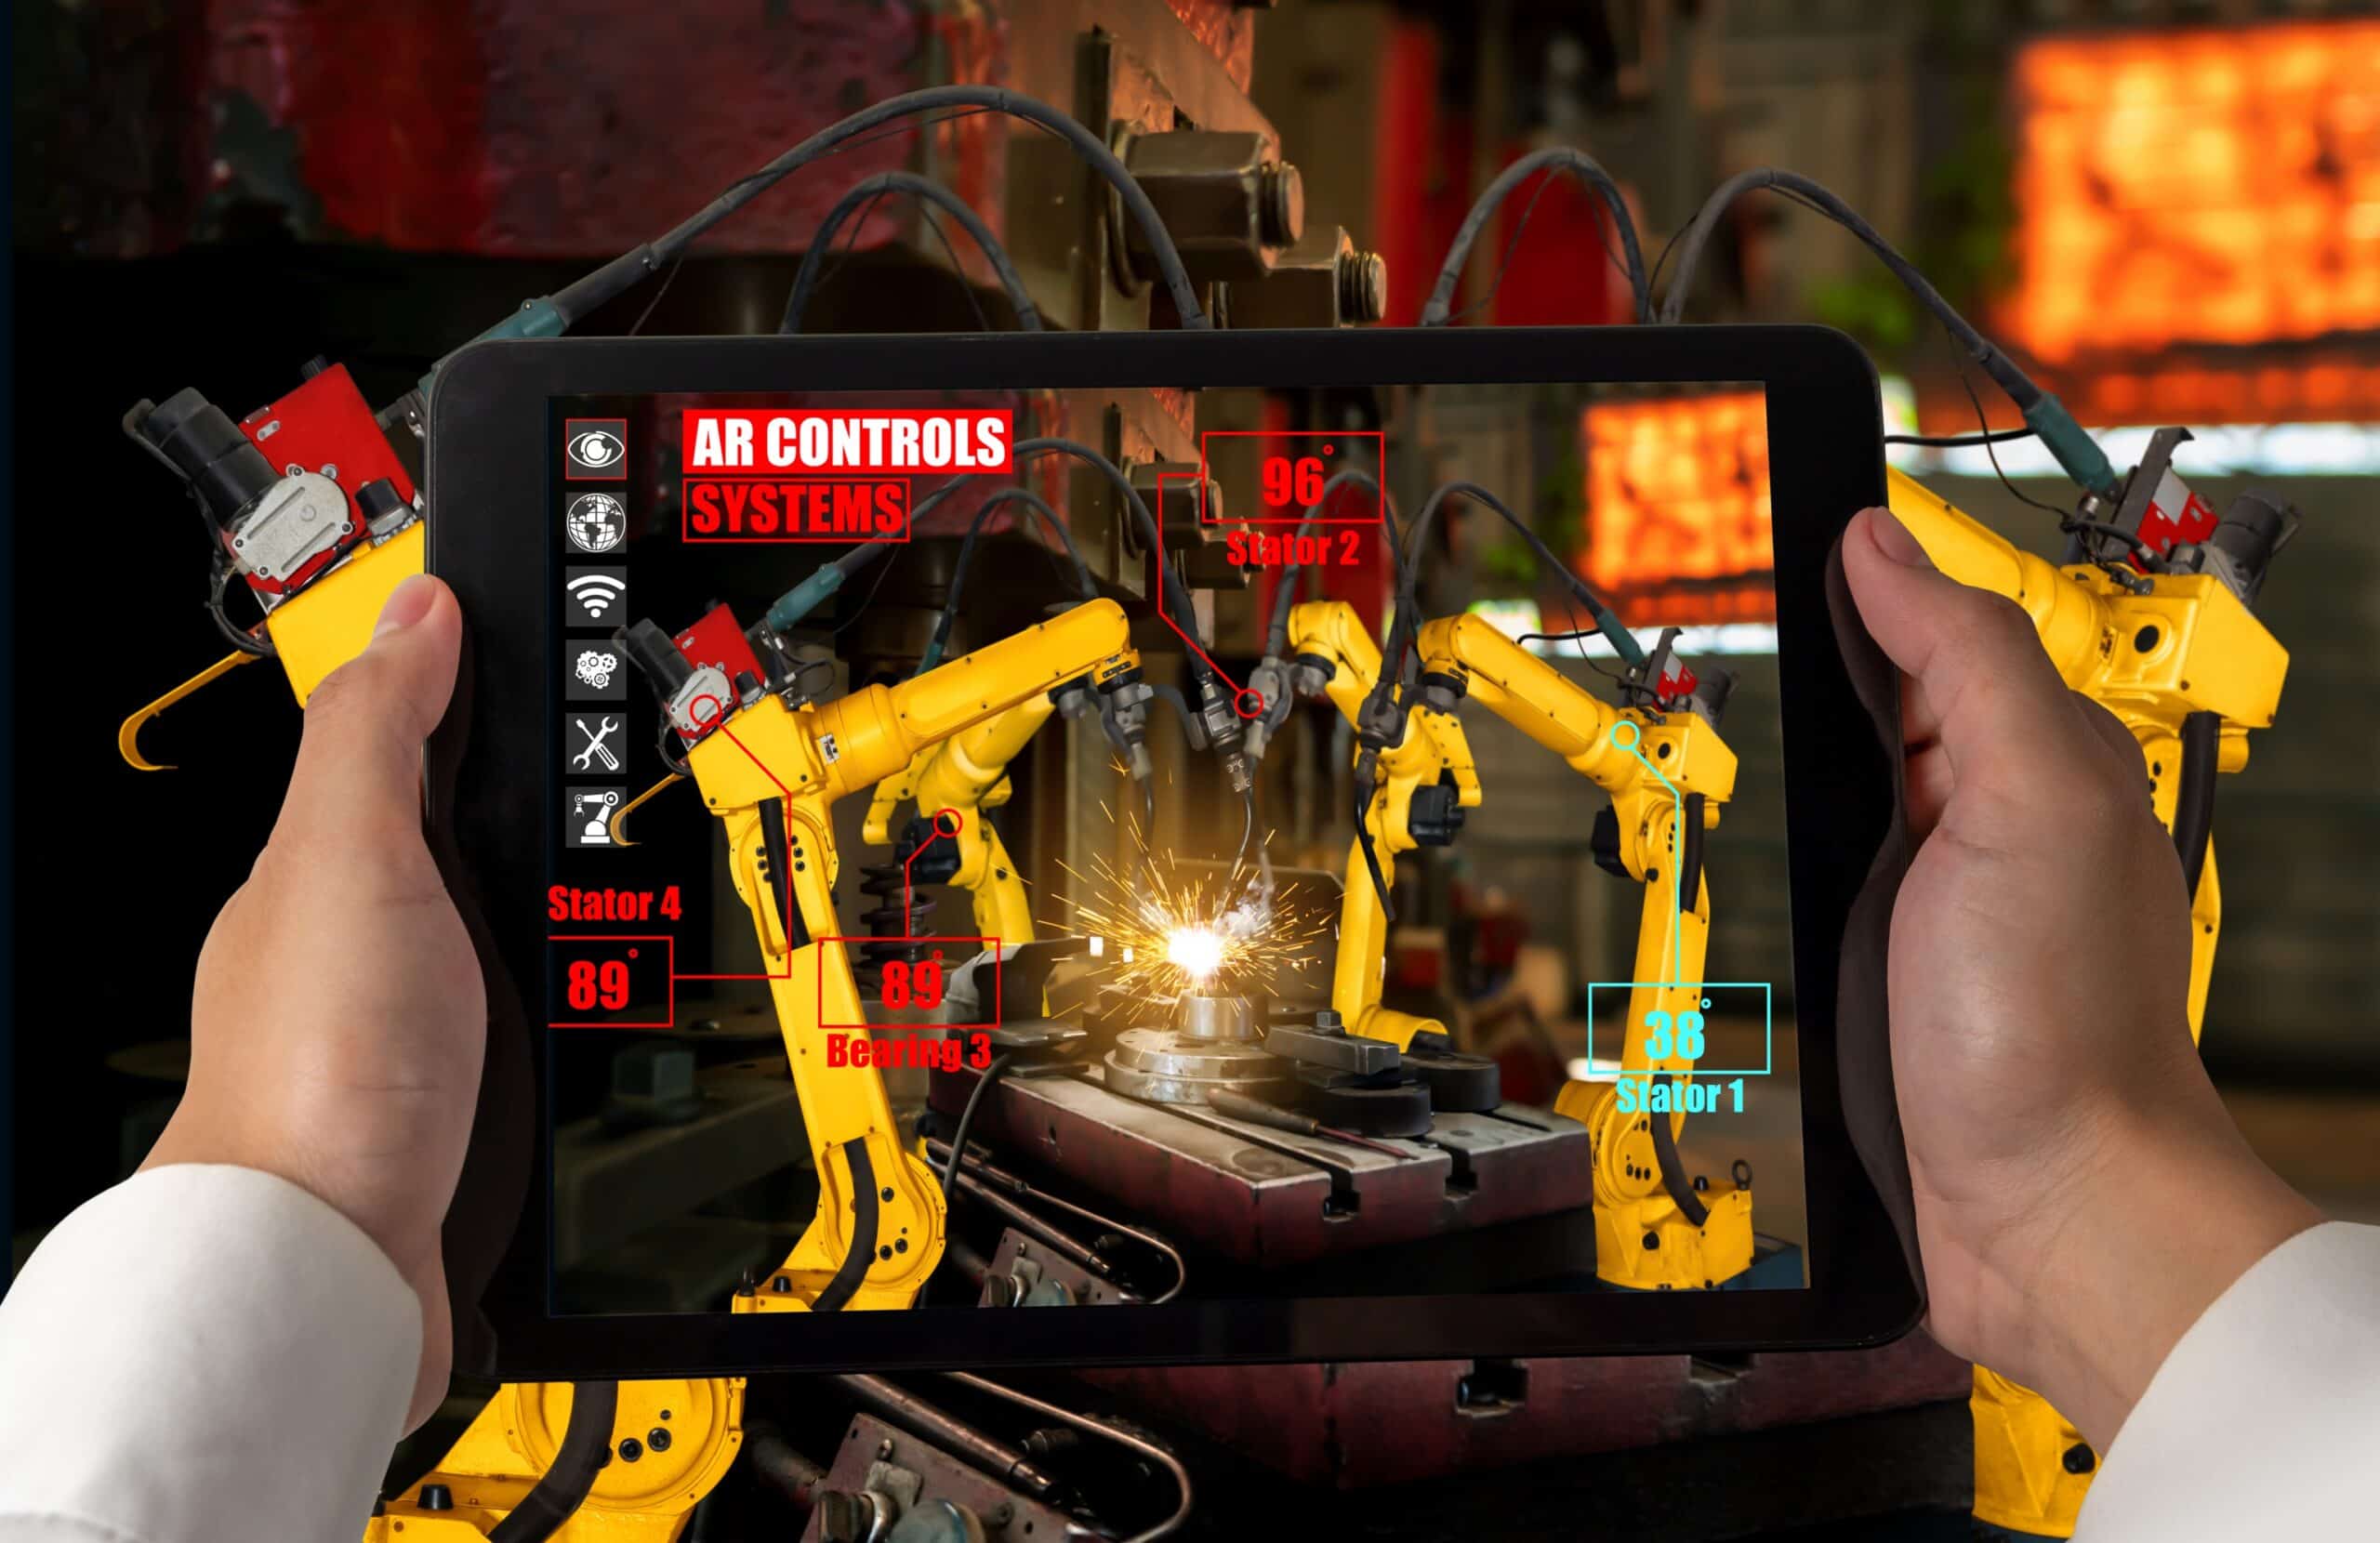 Augmented Reality for Enhancing Work Productivity